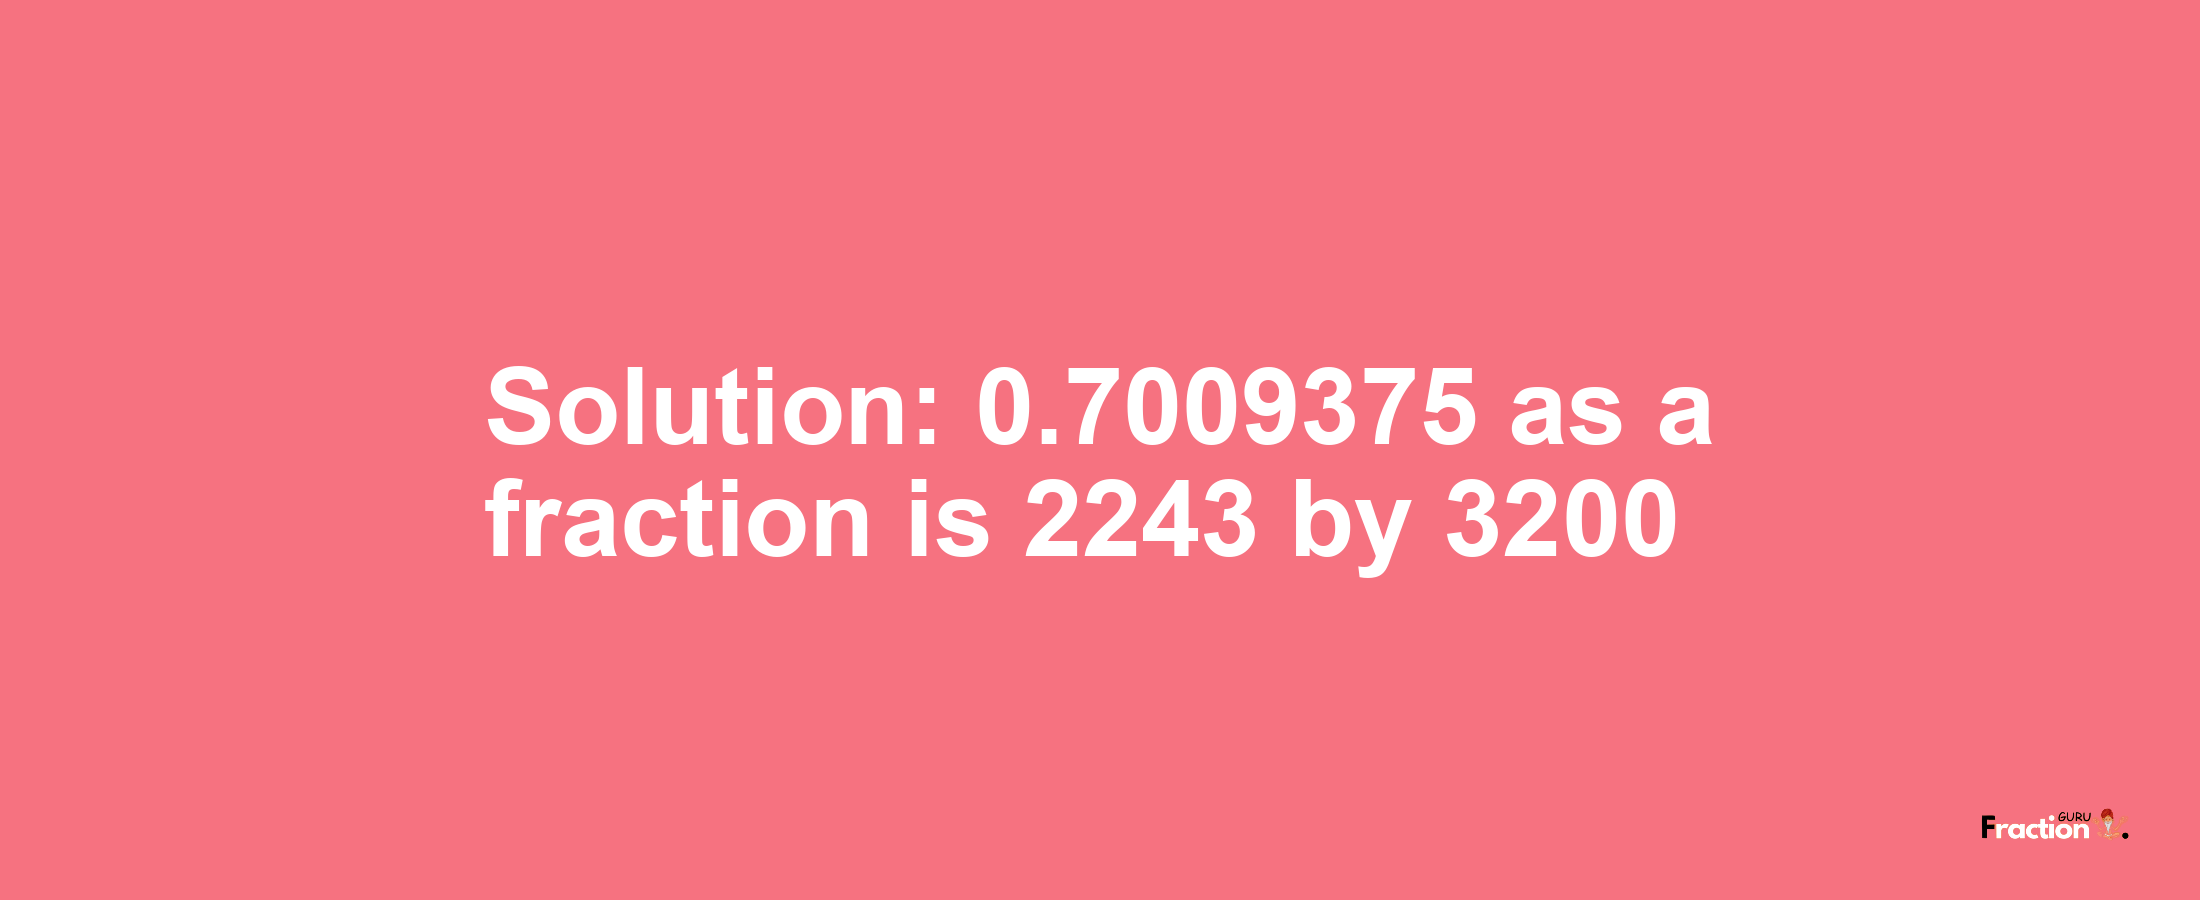 Solution:0.7009375 as a fraction is 2243/3200